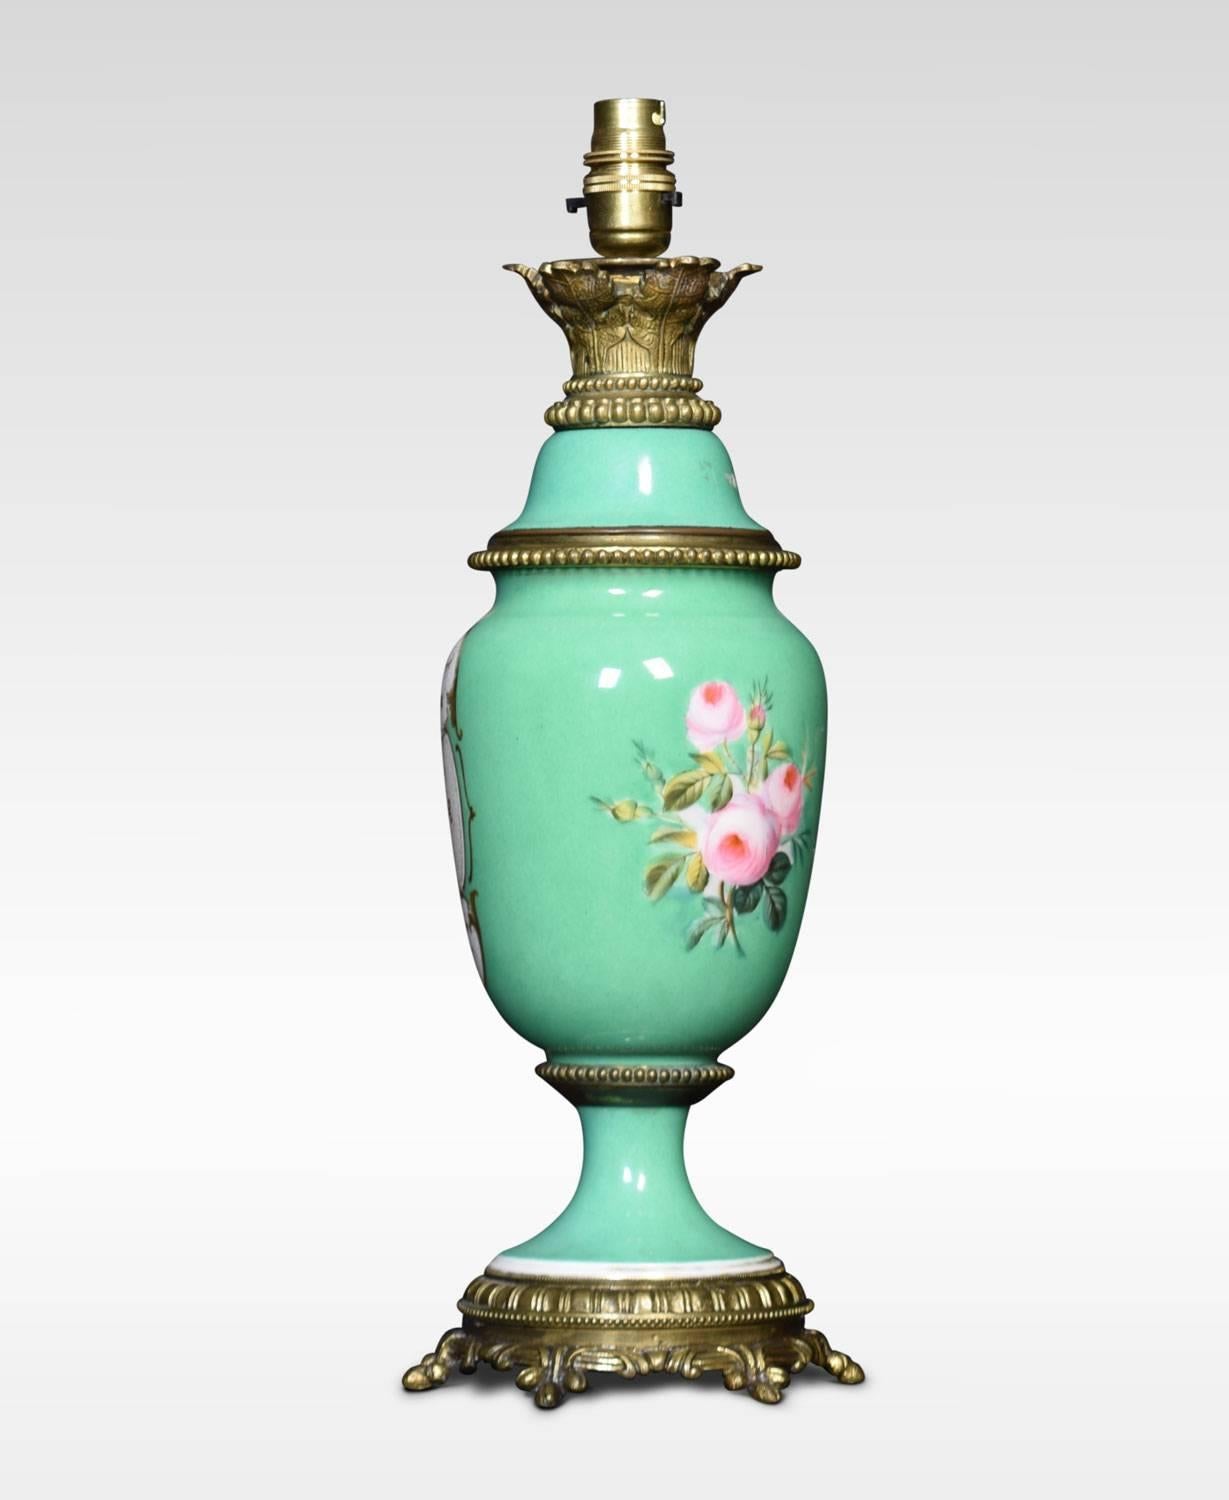 Sevres style table lamp table lamp. Hand-painted with gold detail. Featuring a central posy of flowers and similar decoration to the opposing side. Raised up on gilded feet. Having matched pale rose and green fringed lampshade.
Dimensions
Height